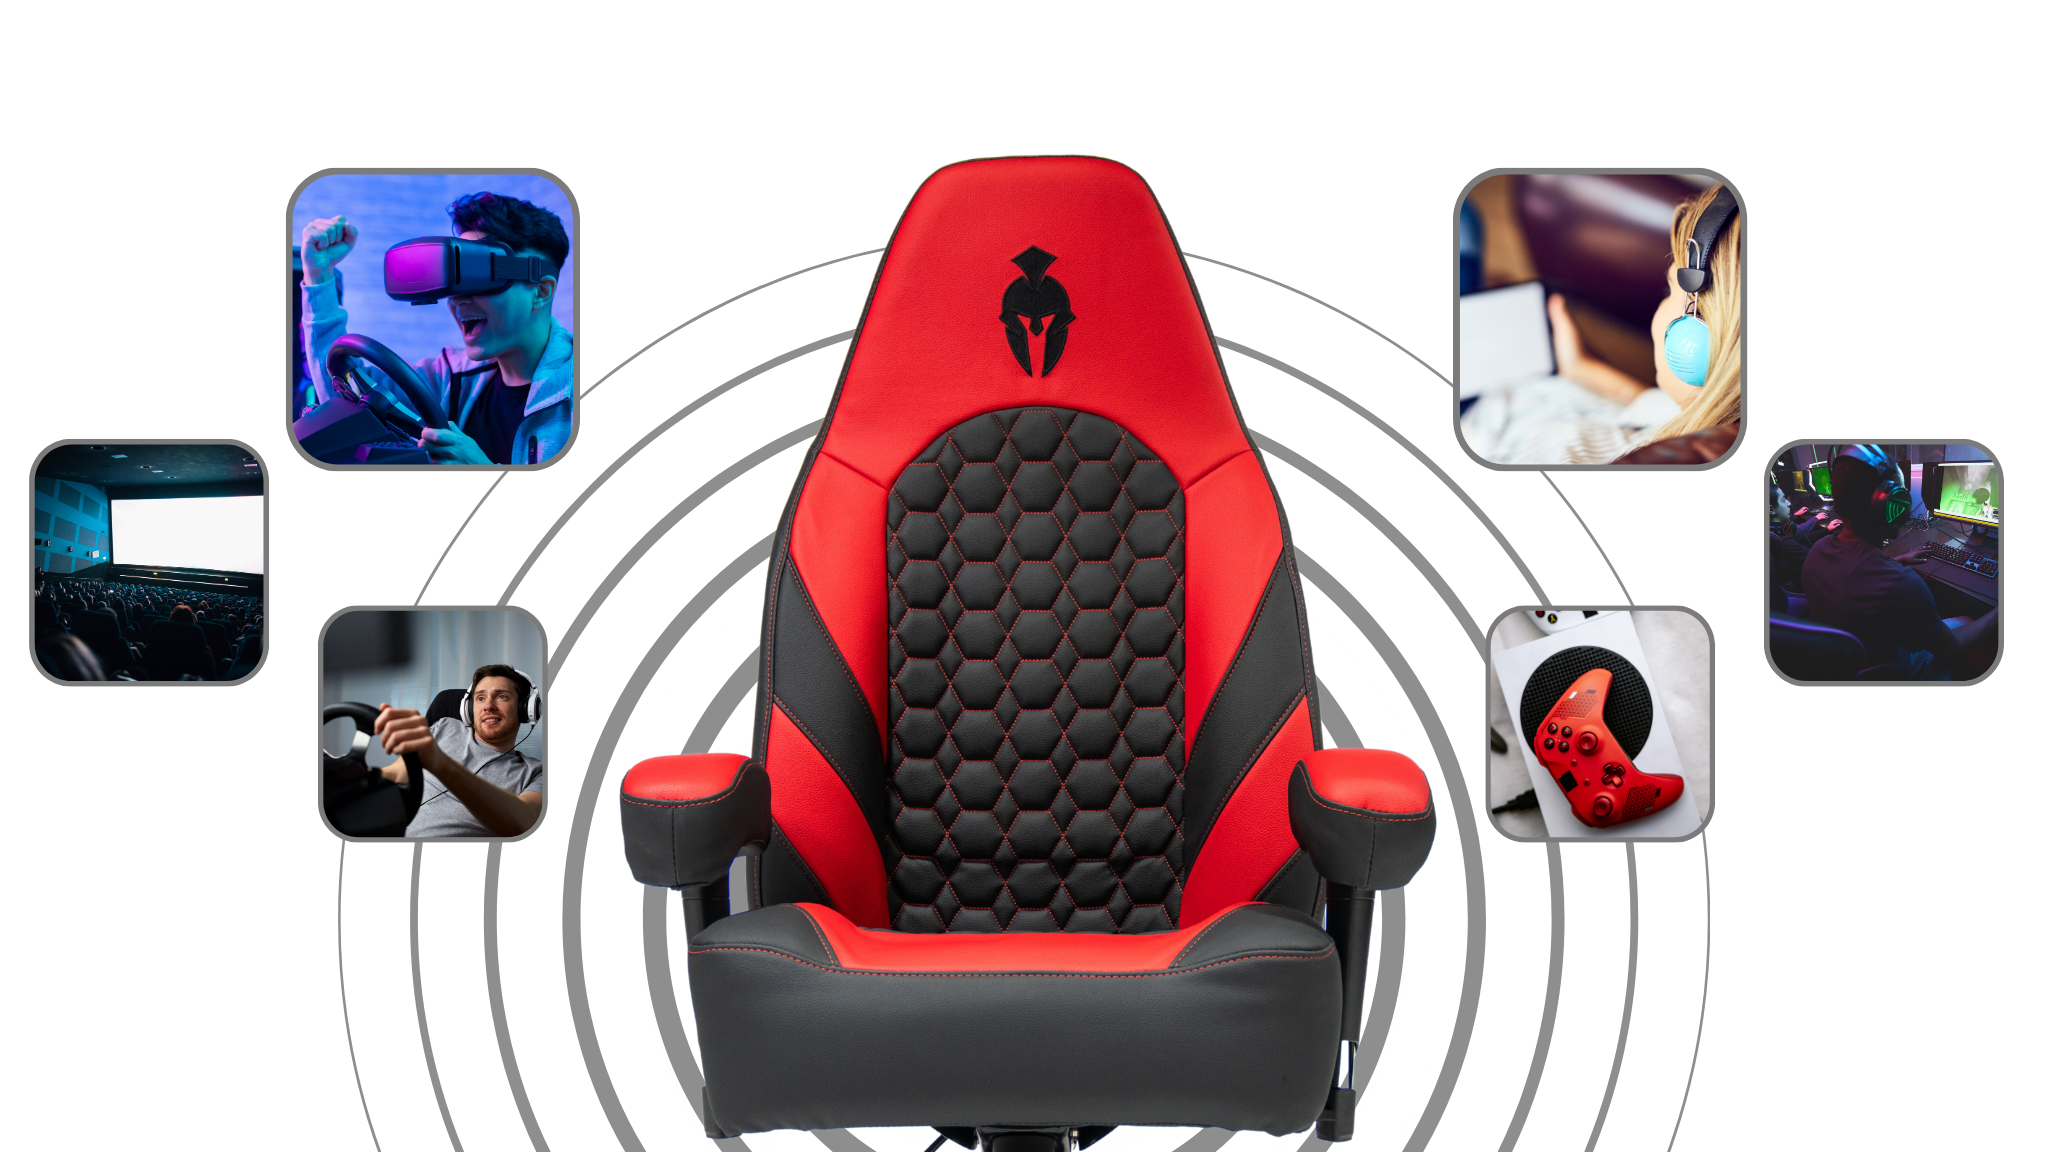 Red and Black Gaming Chair Showing multiple ways of Haptic Feedback inputs